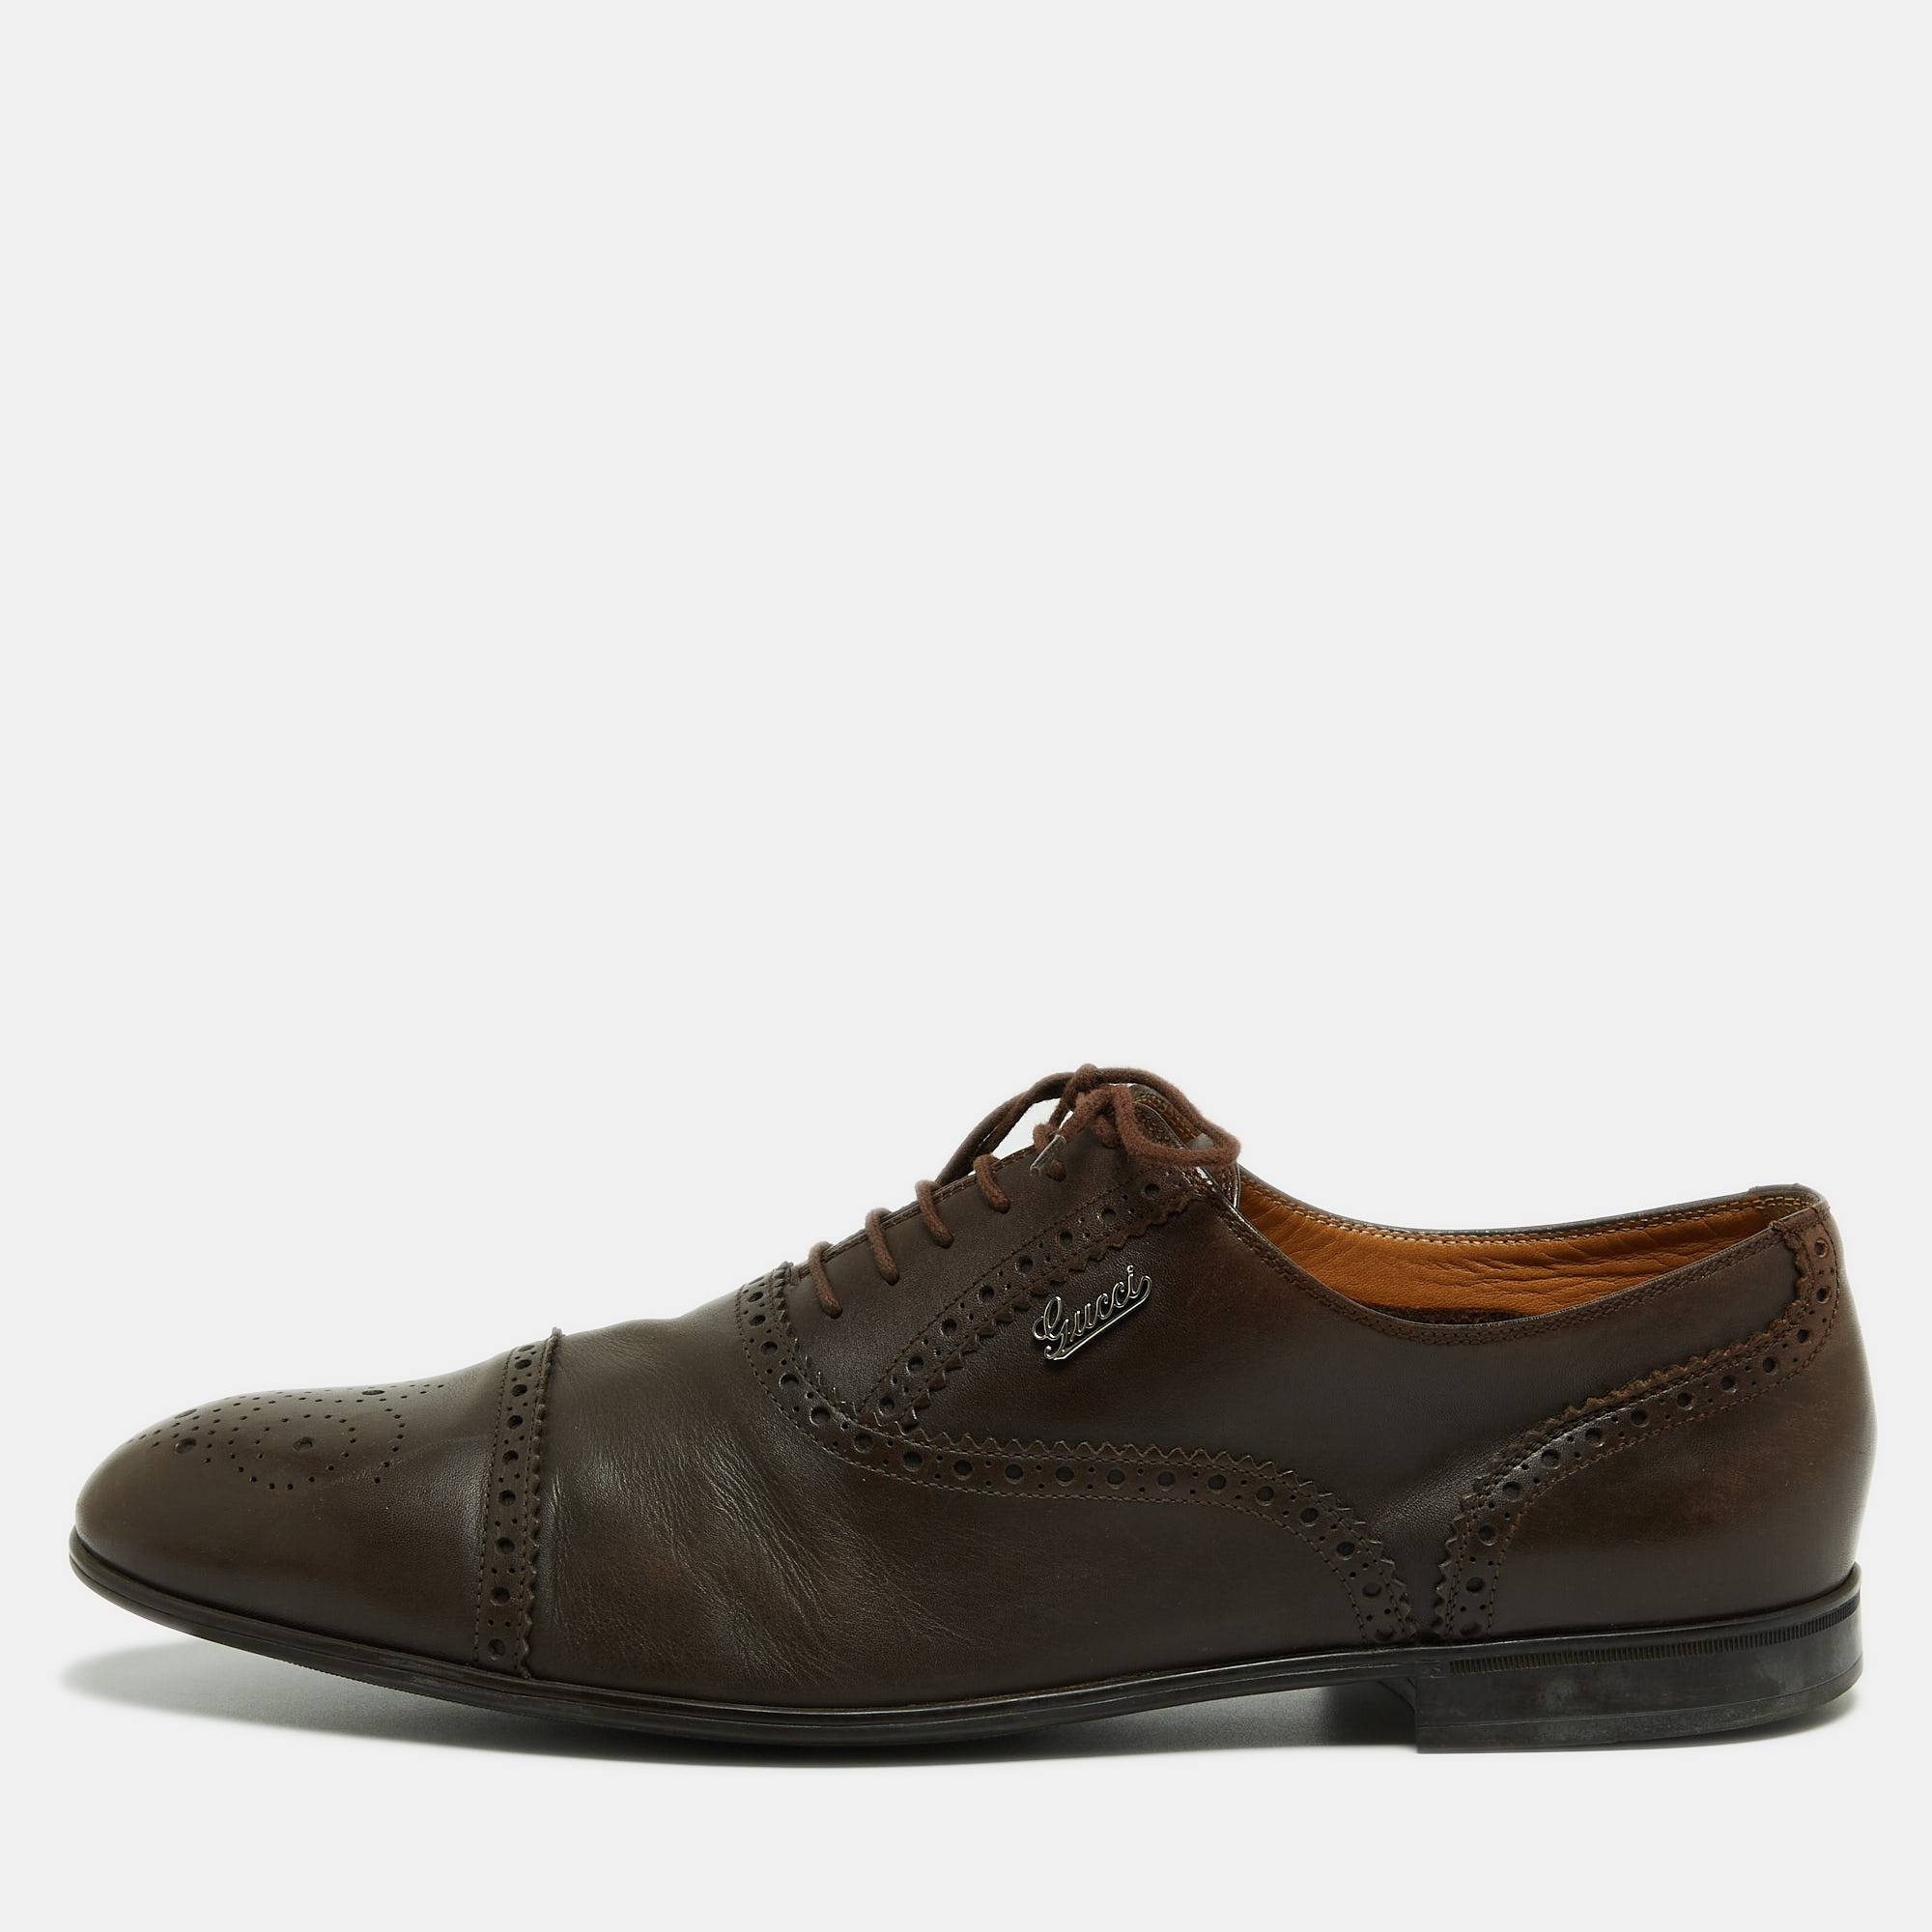 Pre-owned Gucci Brown Leather Brogue Oxfords Size 45.5